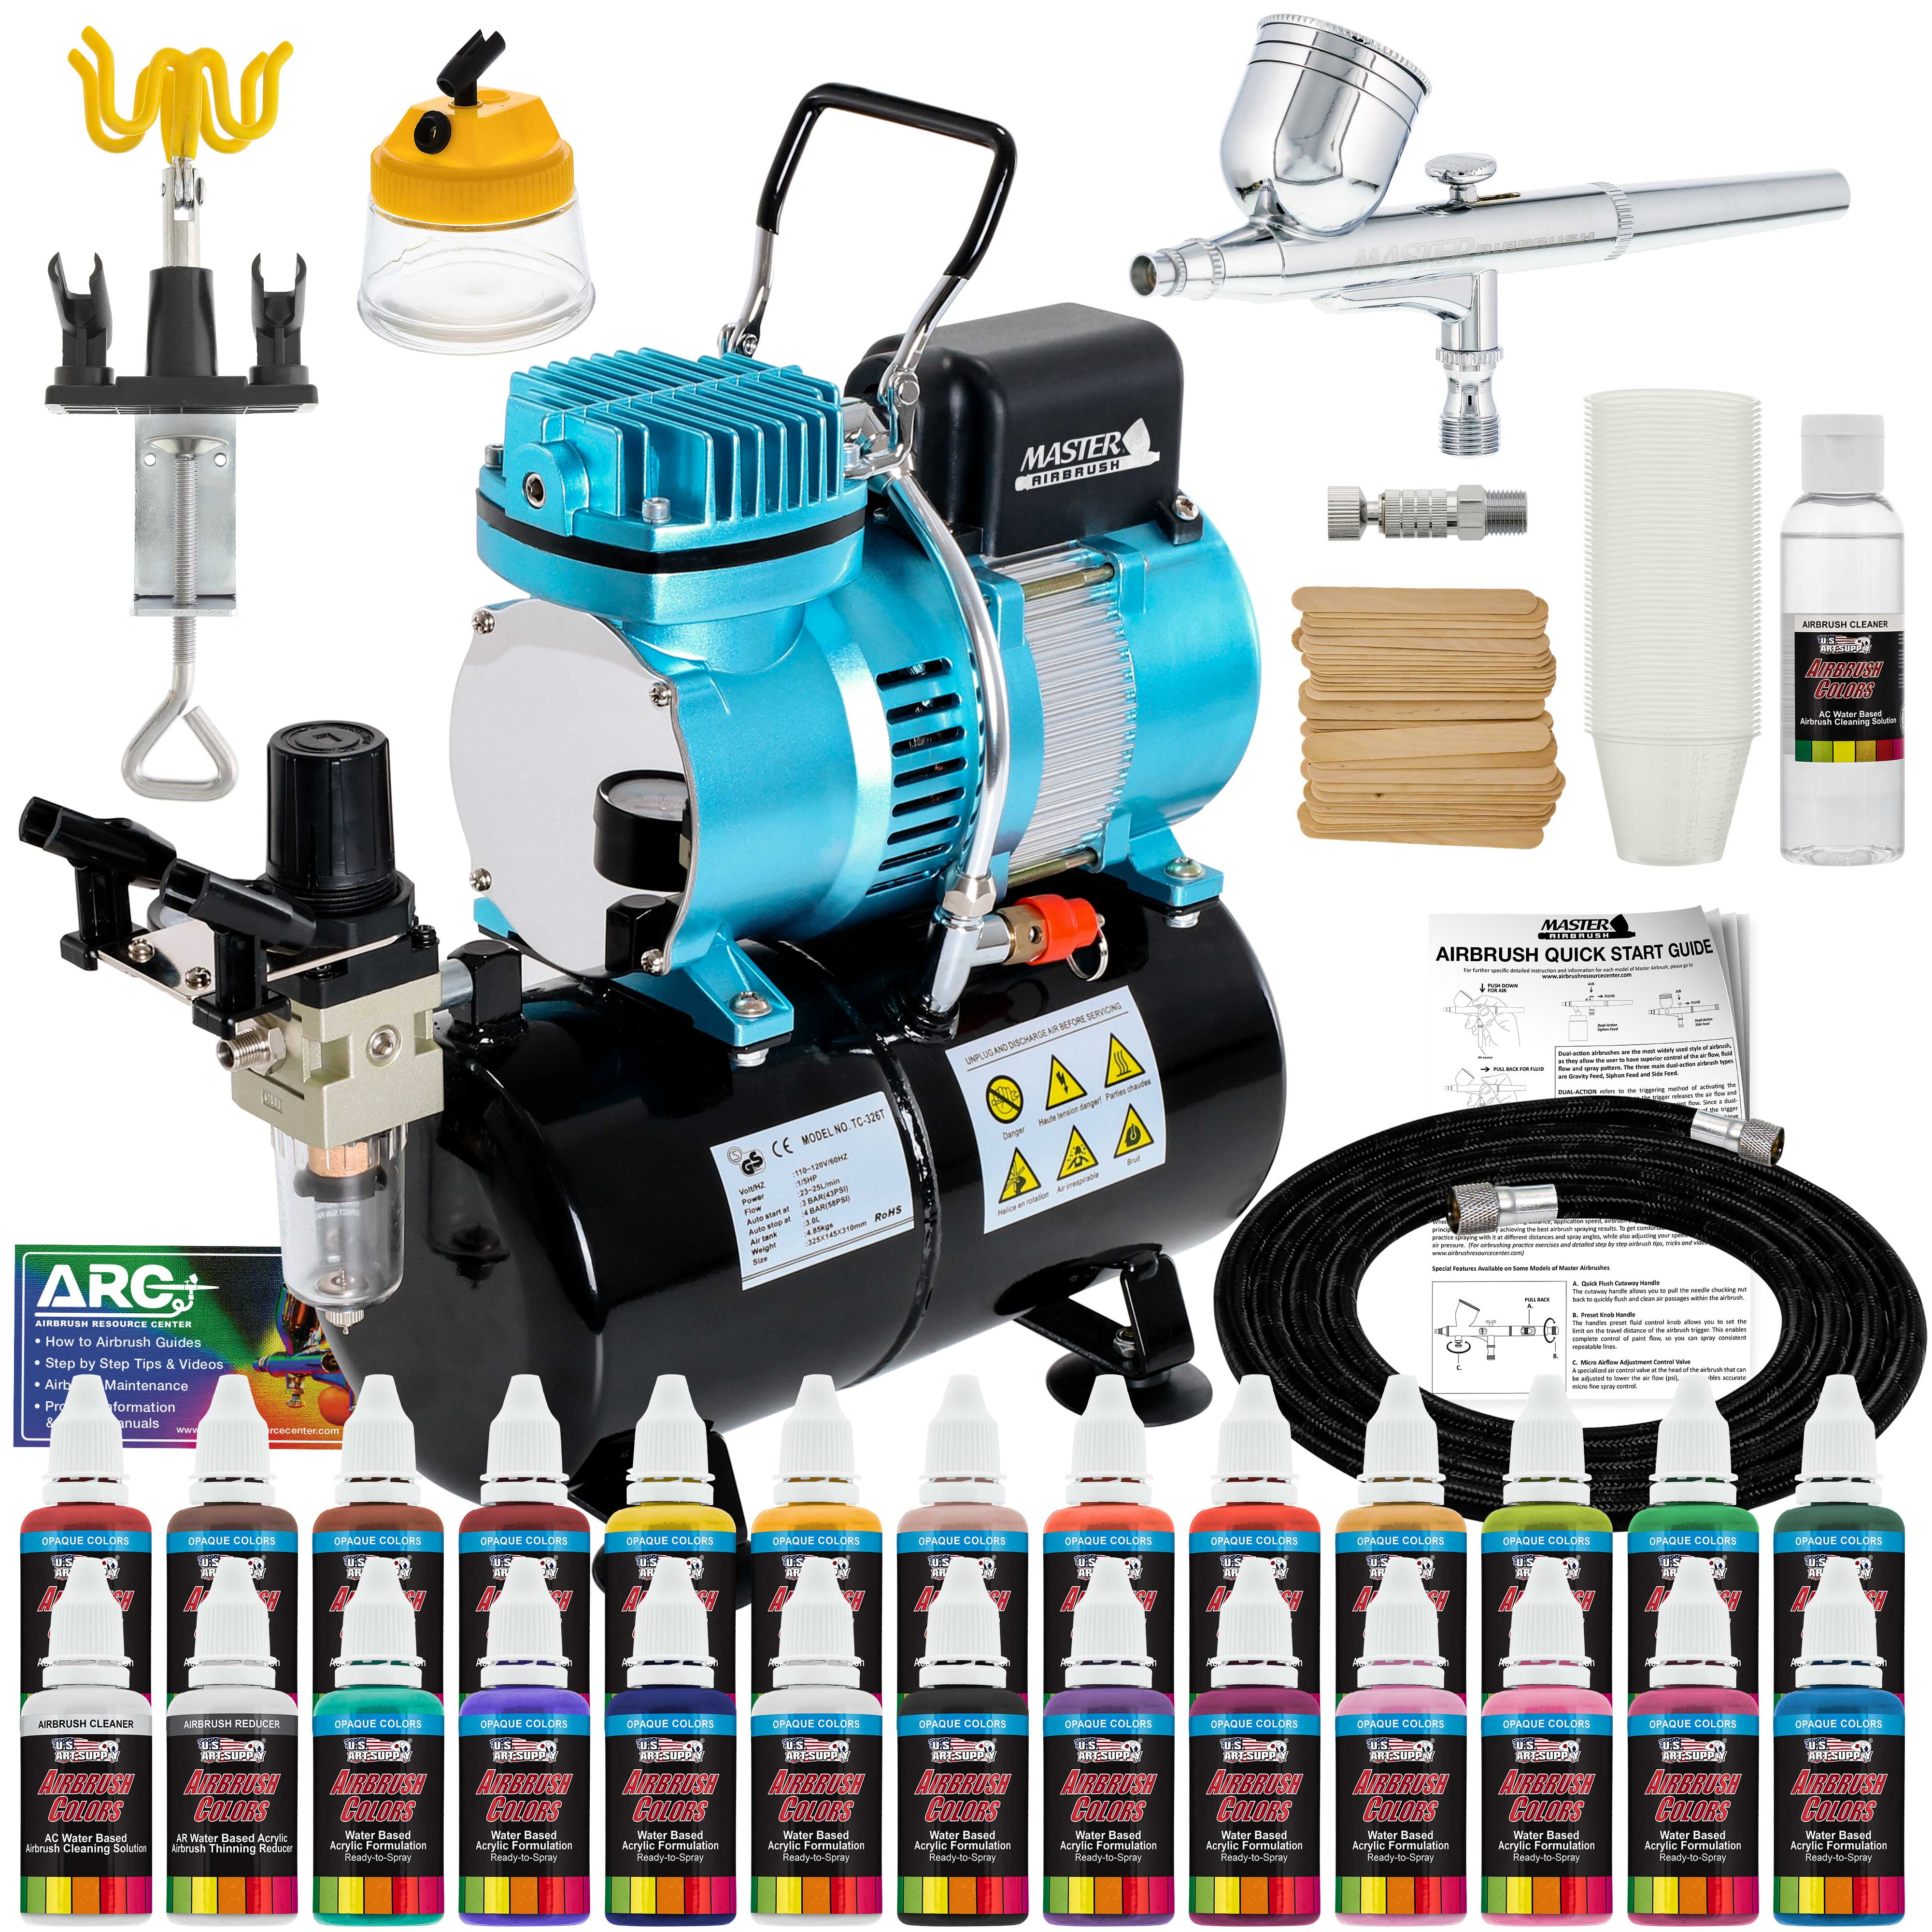 Dual Fan Air Compressor Airbrushing System Kit with 3 Airbrushes, 6 Color  Acrylic Paint Set, Bundle - Foods Co.